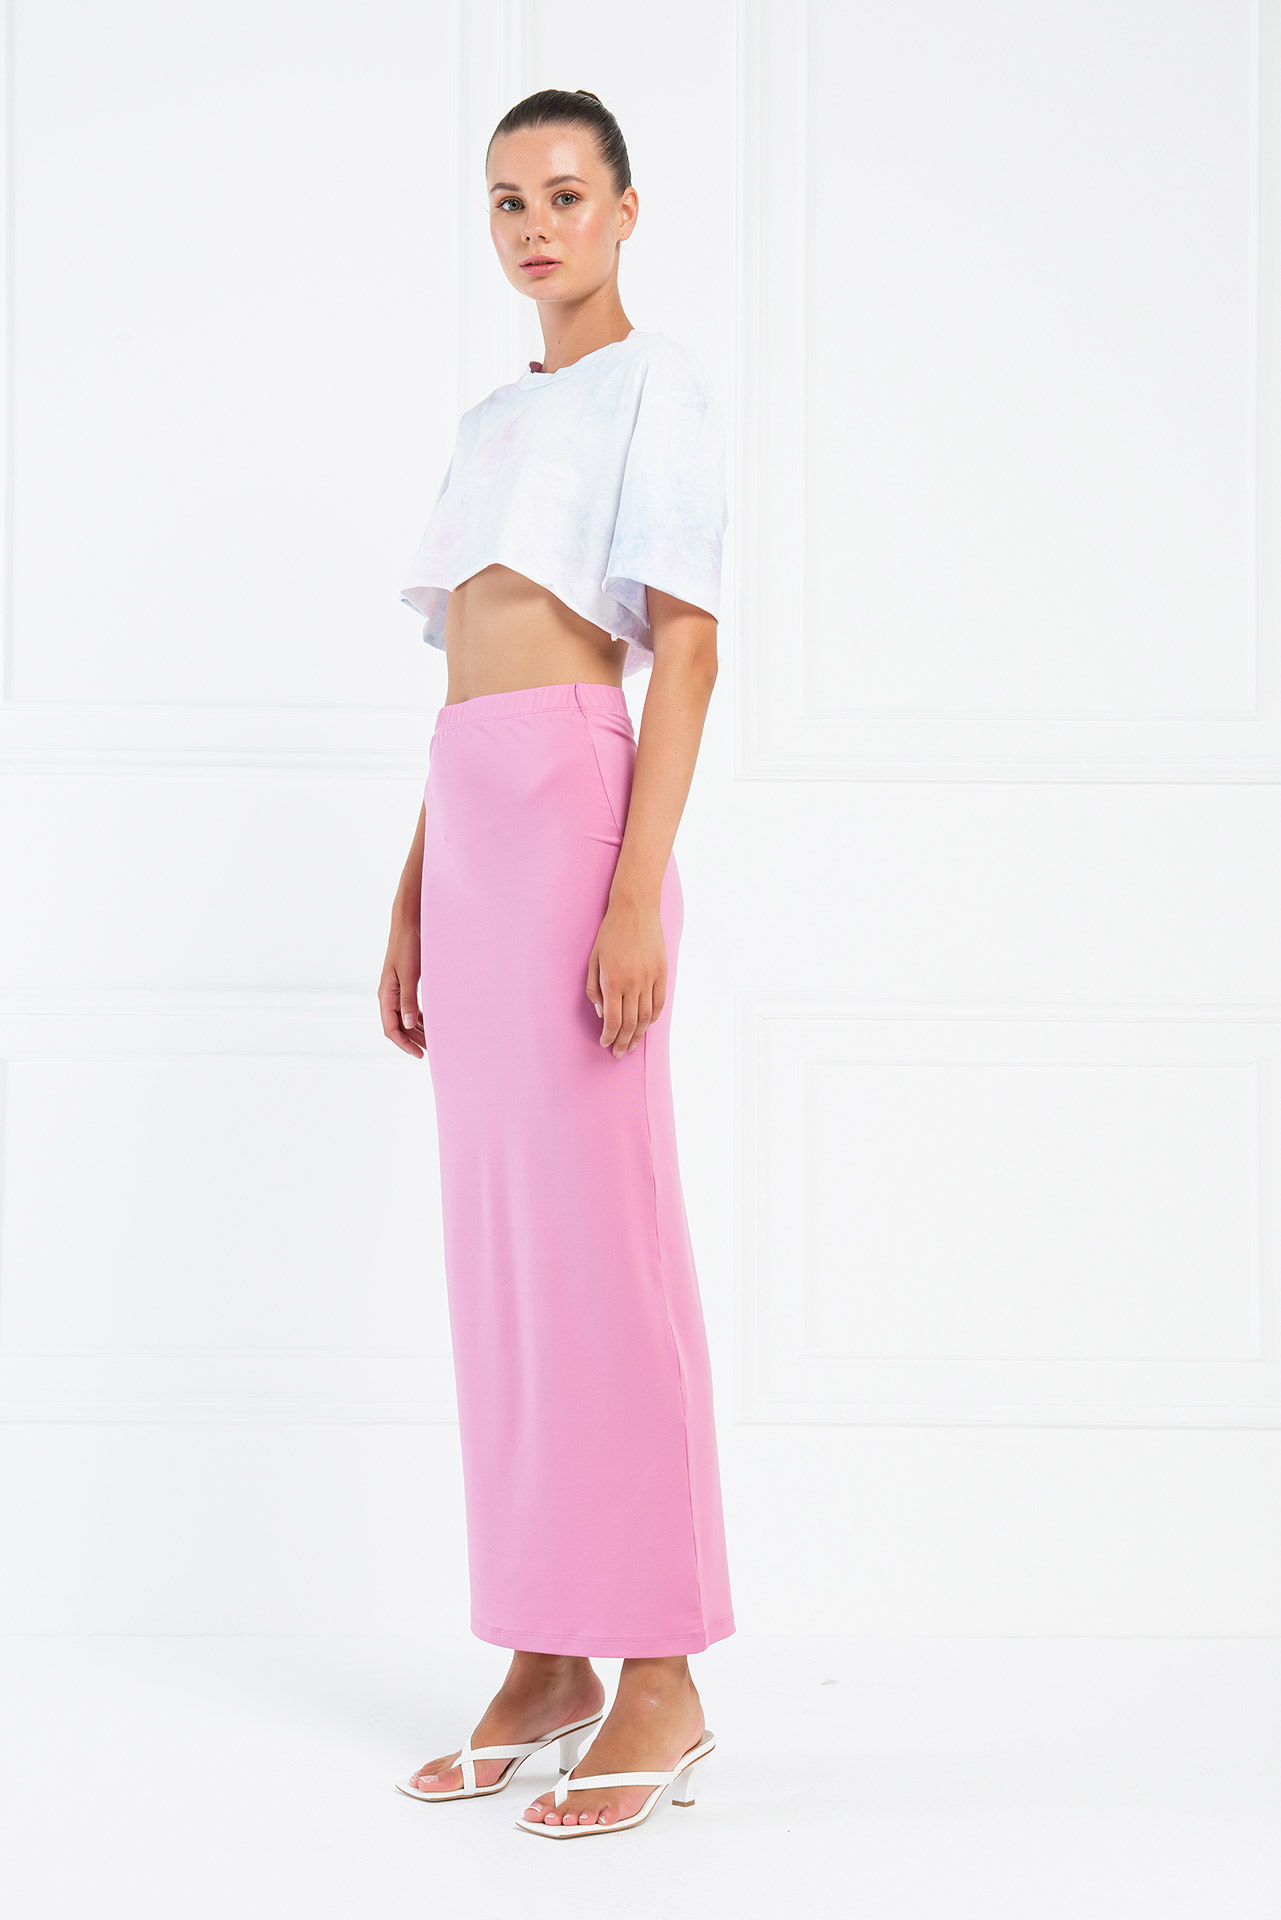 Doly Pink Maxi Skirt